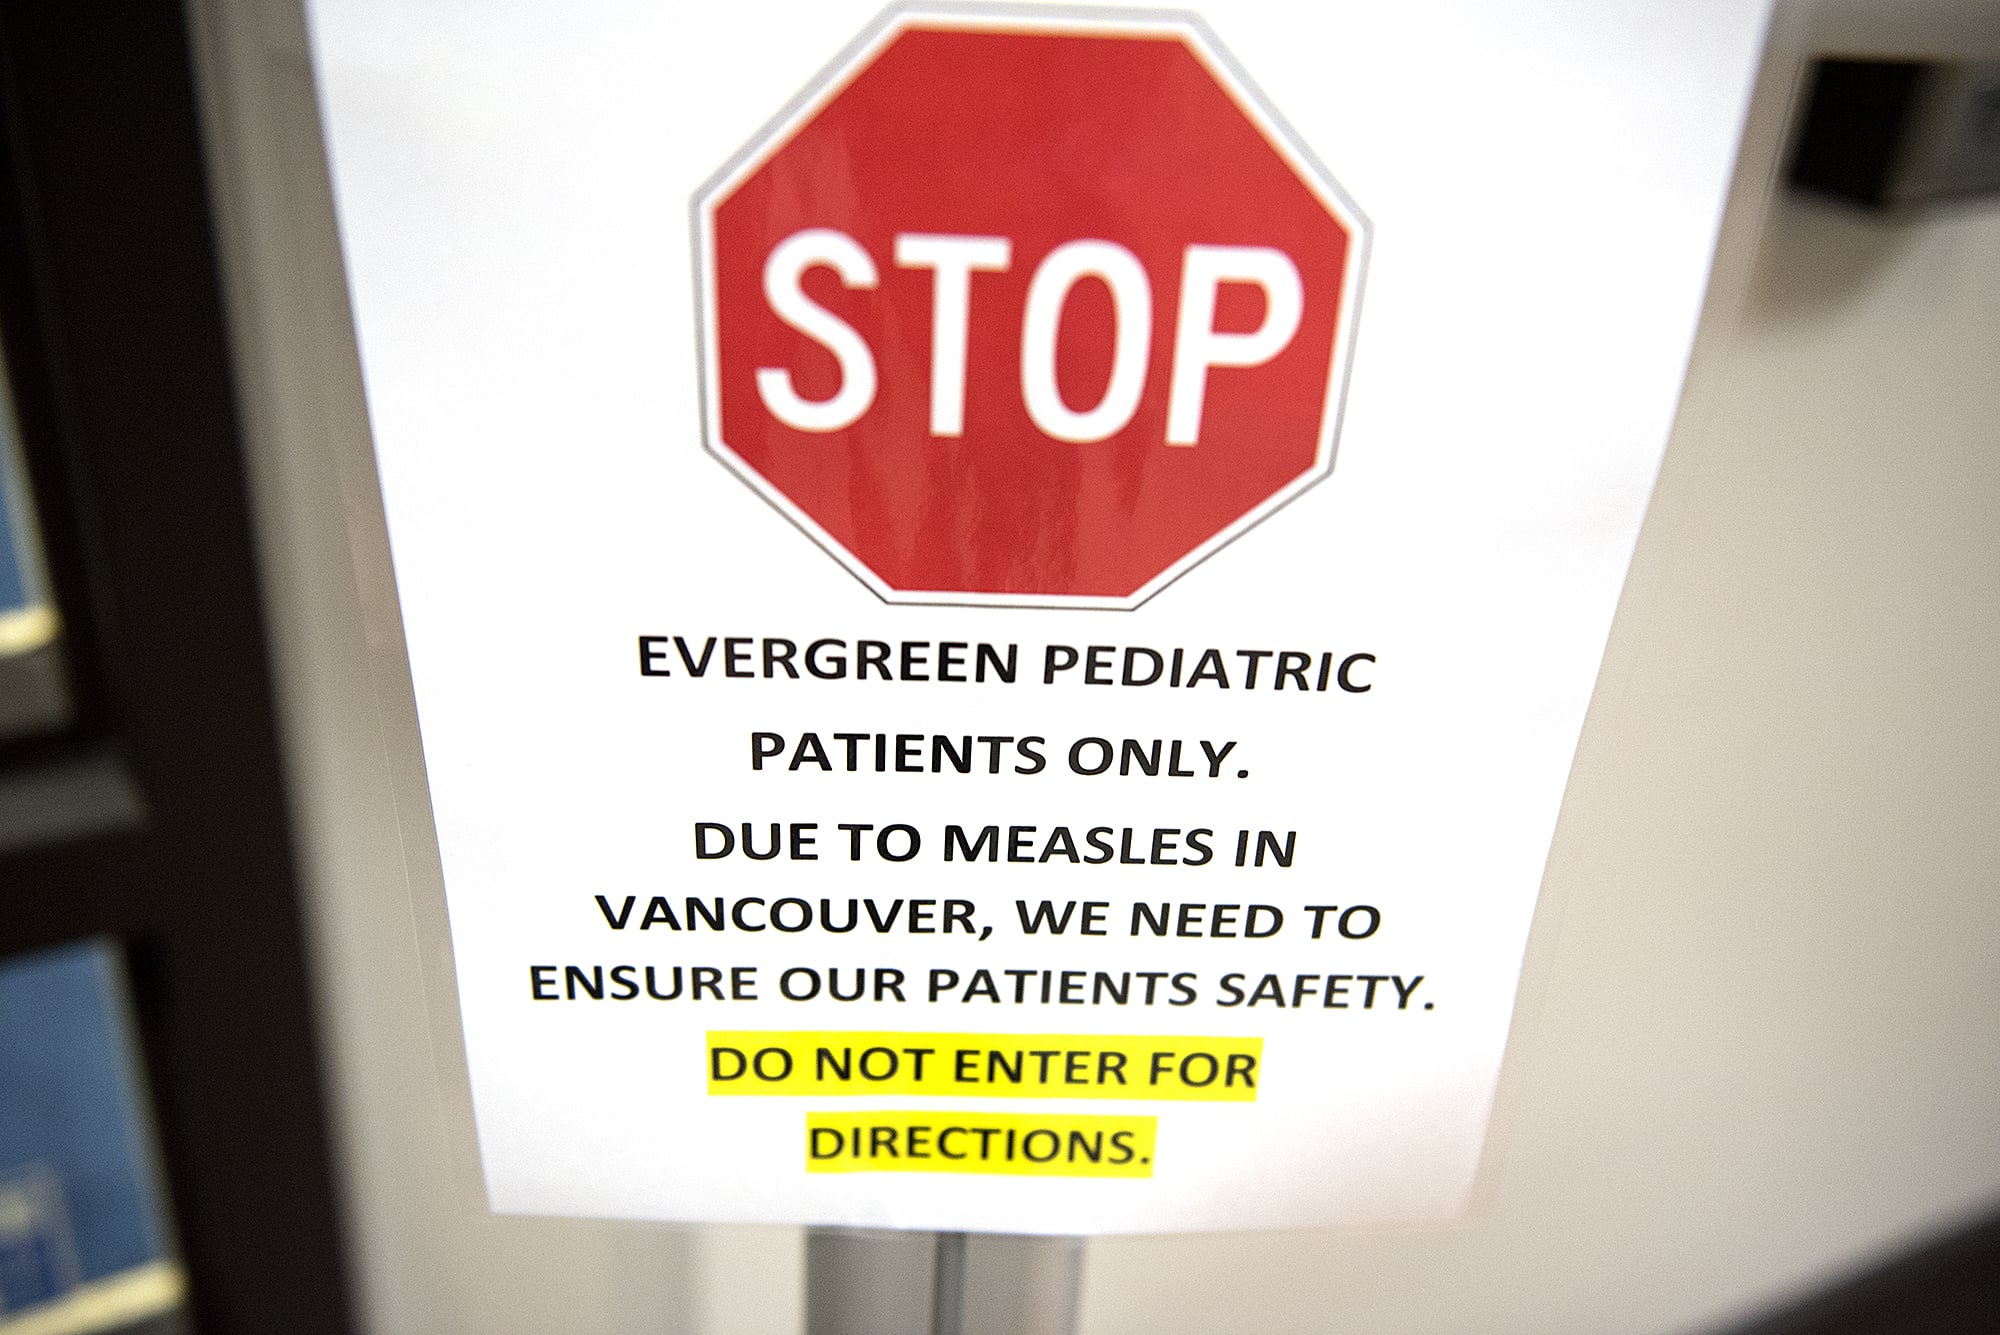 A sign warns visitors to stay away if they have measles at Evergreen Pediatric Clinic.